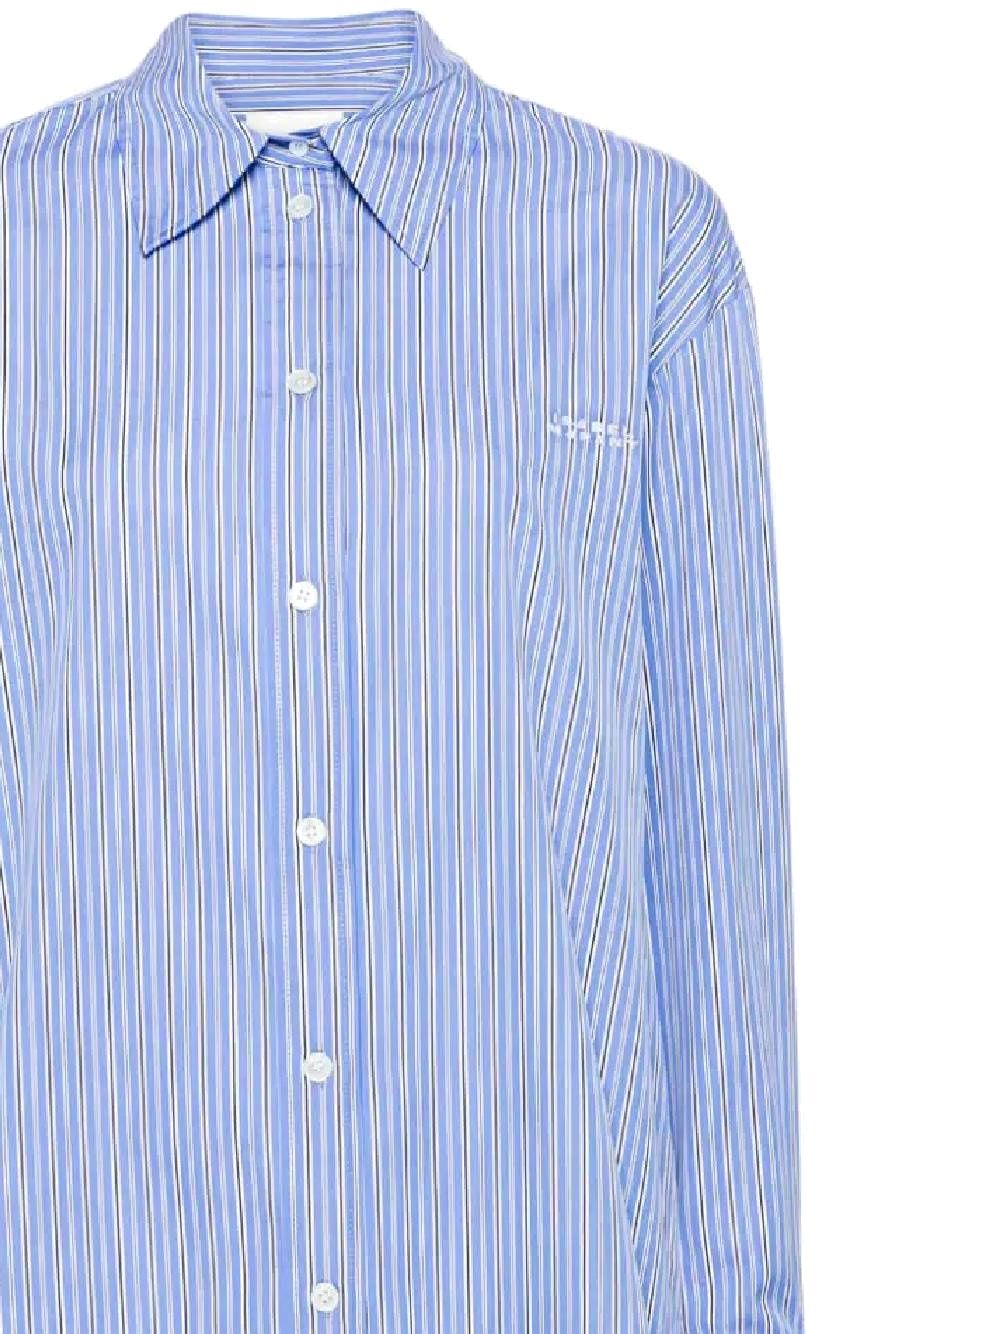 Shirt with vertical striped print